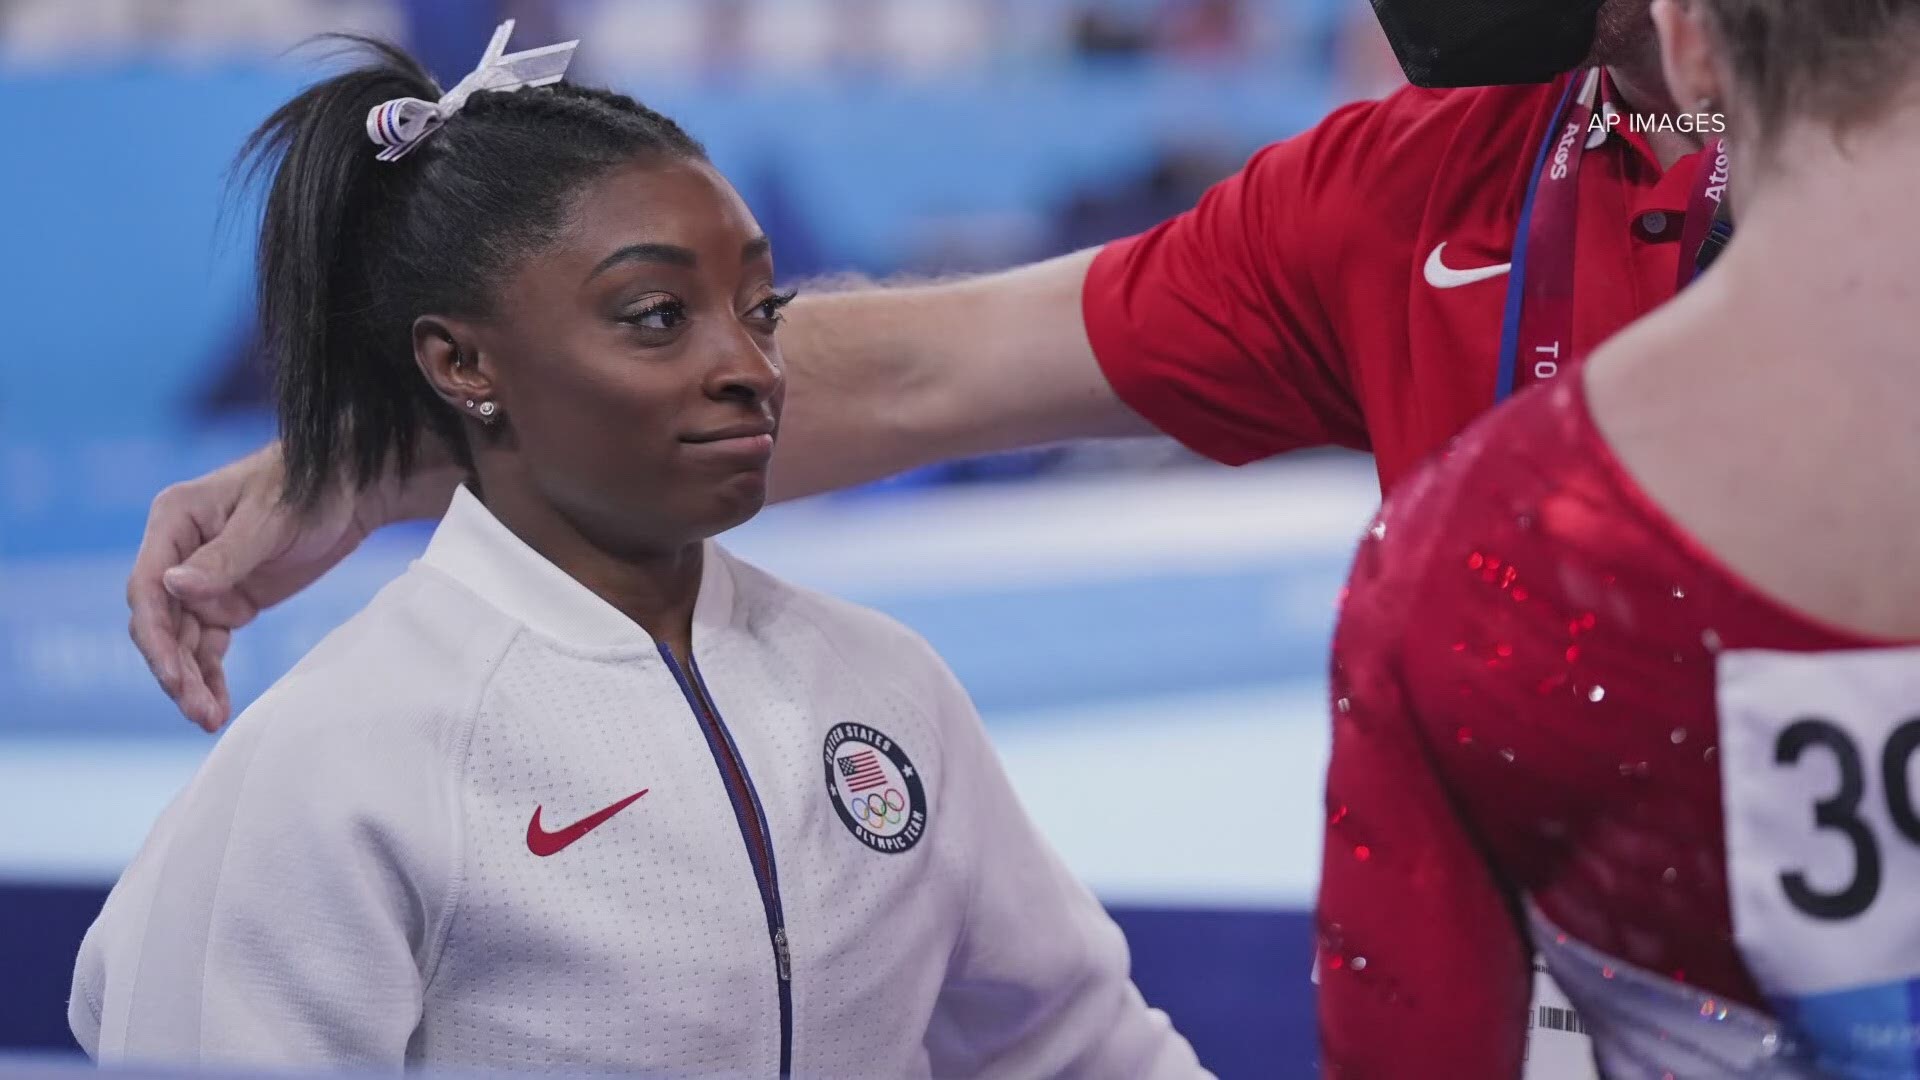 Celebrated American gymnast Simon Biles pulled out of two events at the Tokyo Olympics, citing mental health struggles. She is one of many with similar struggles.